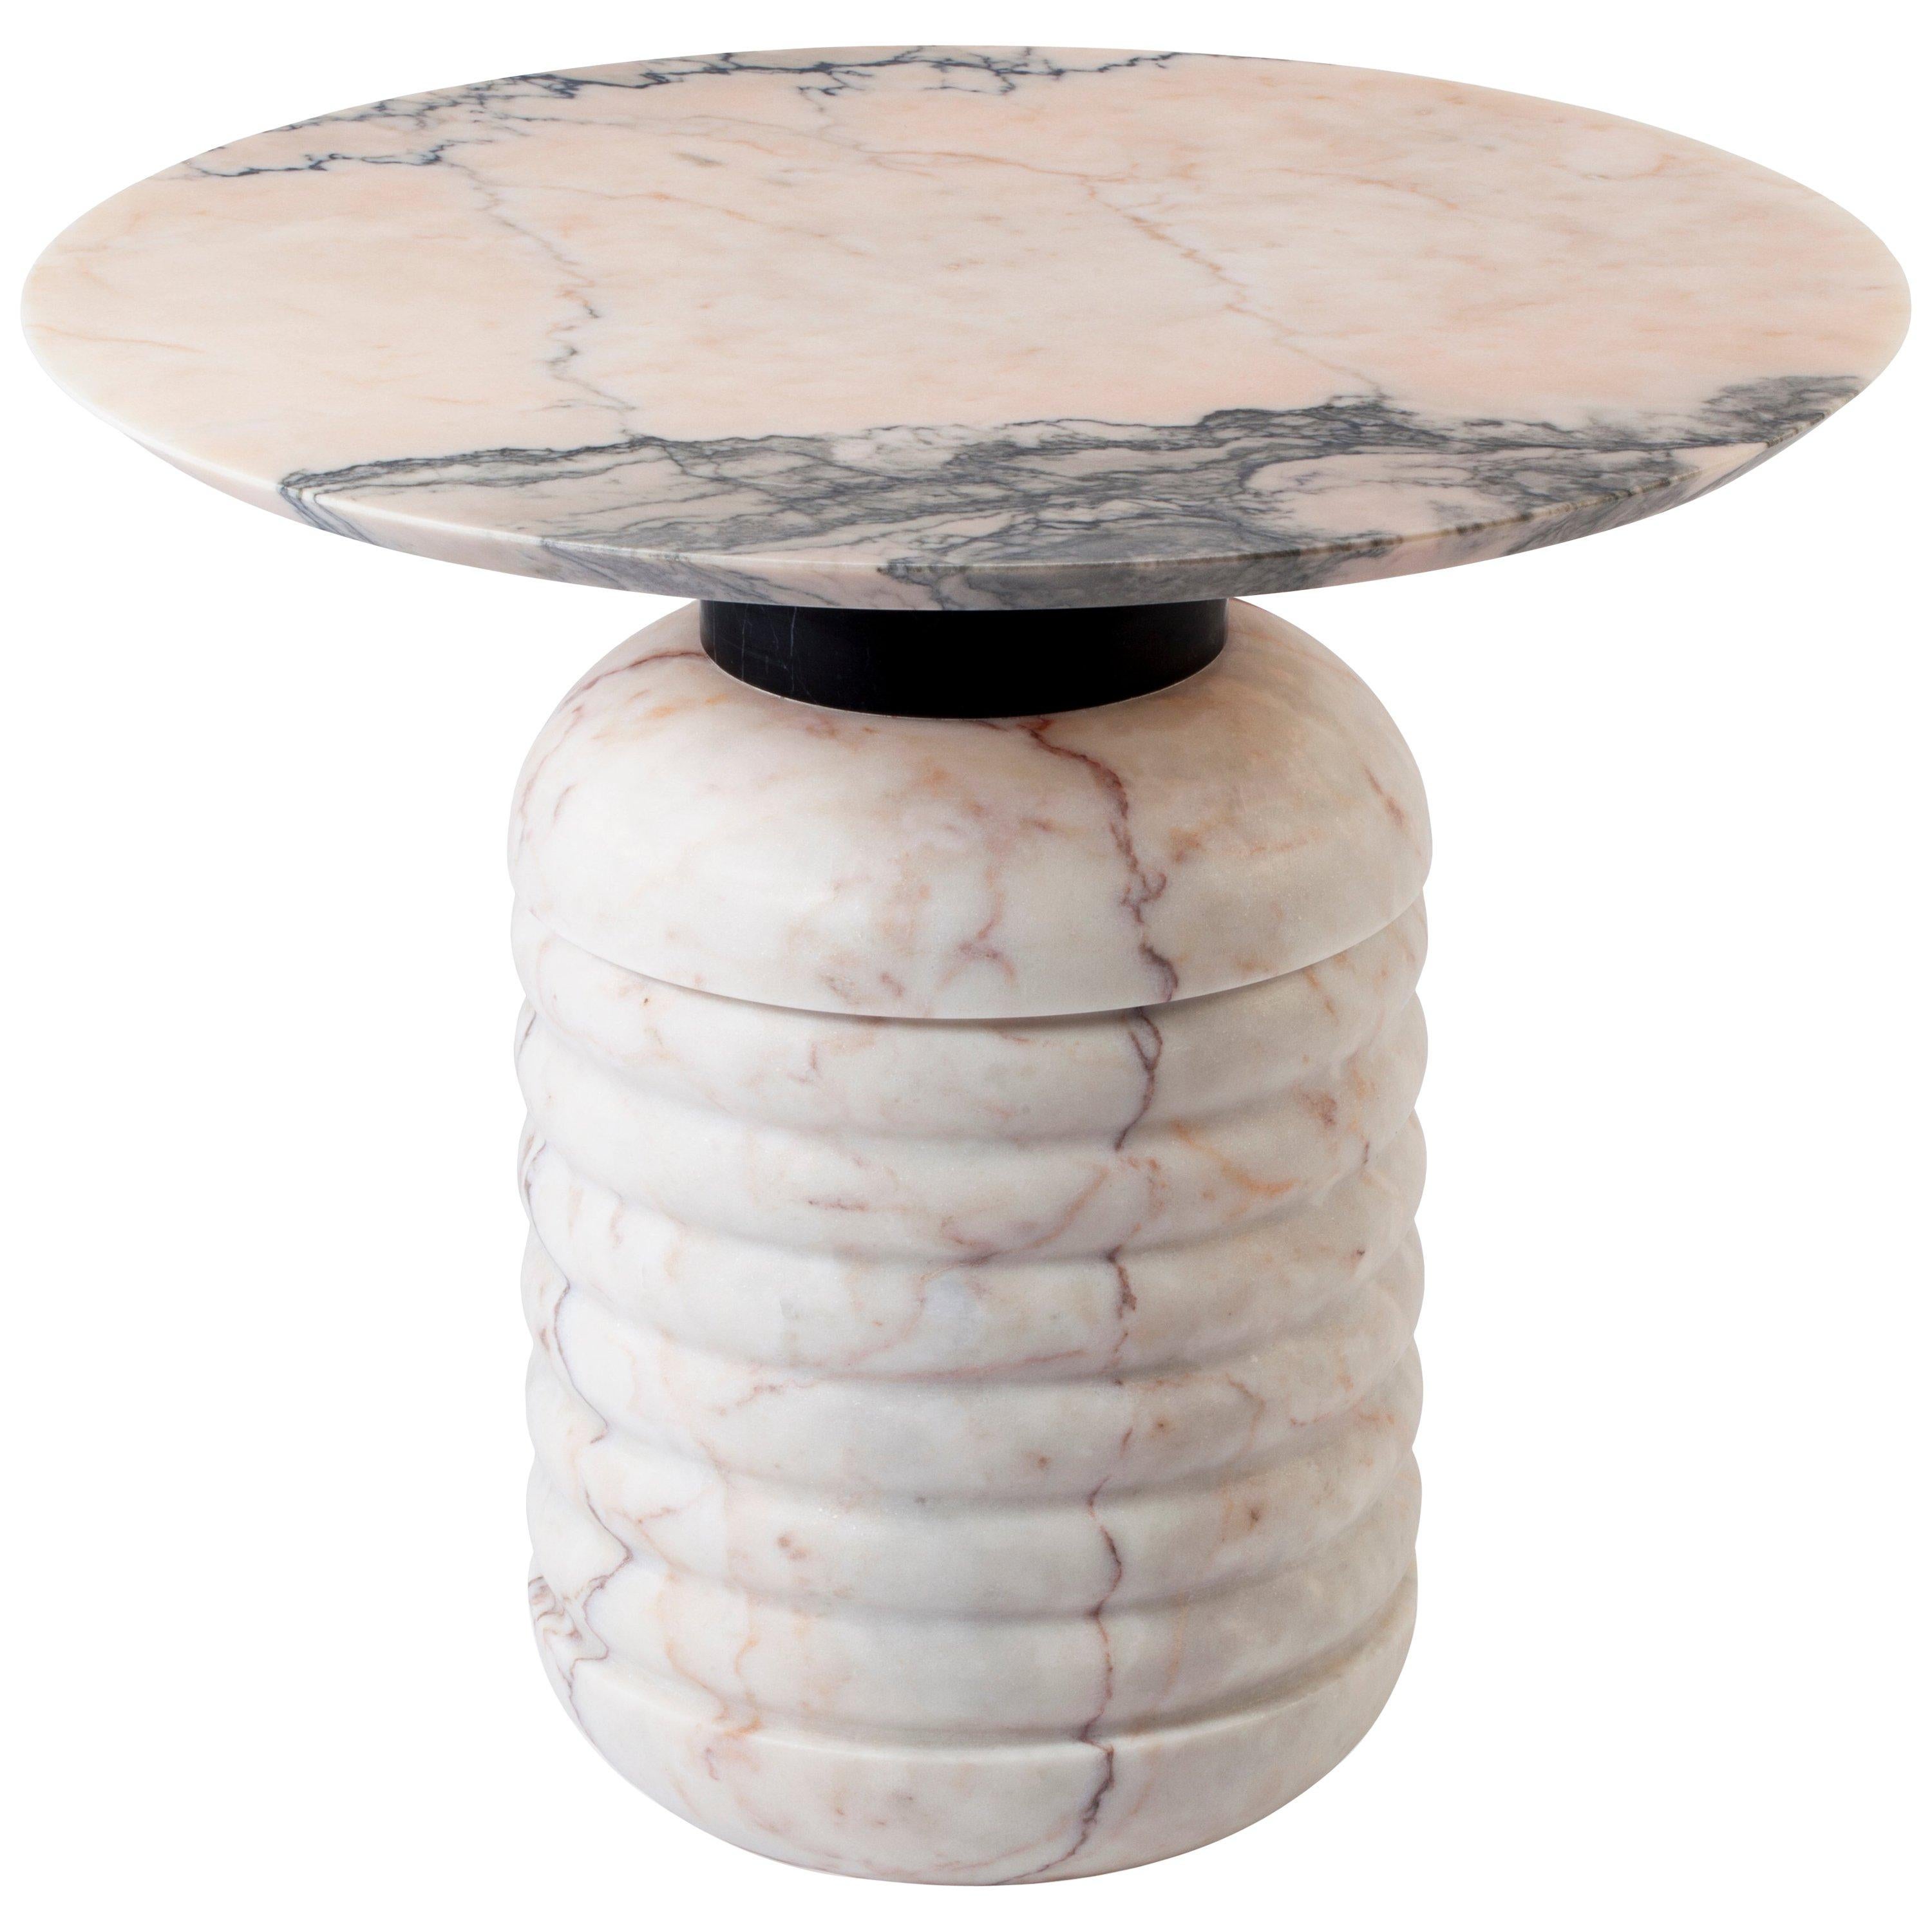 Top - Nero Marquina marble
Middle Band - Estremoz White marble
Base - Estremoz White marble

Custom dimensions: 

- 72cm tall
- 30cm on the neck
- 60cm diameter for the round top


Jean side tables are unique in their conception. The